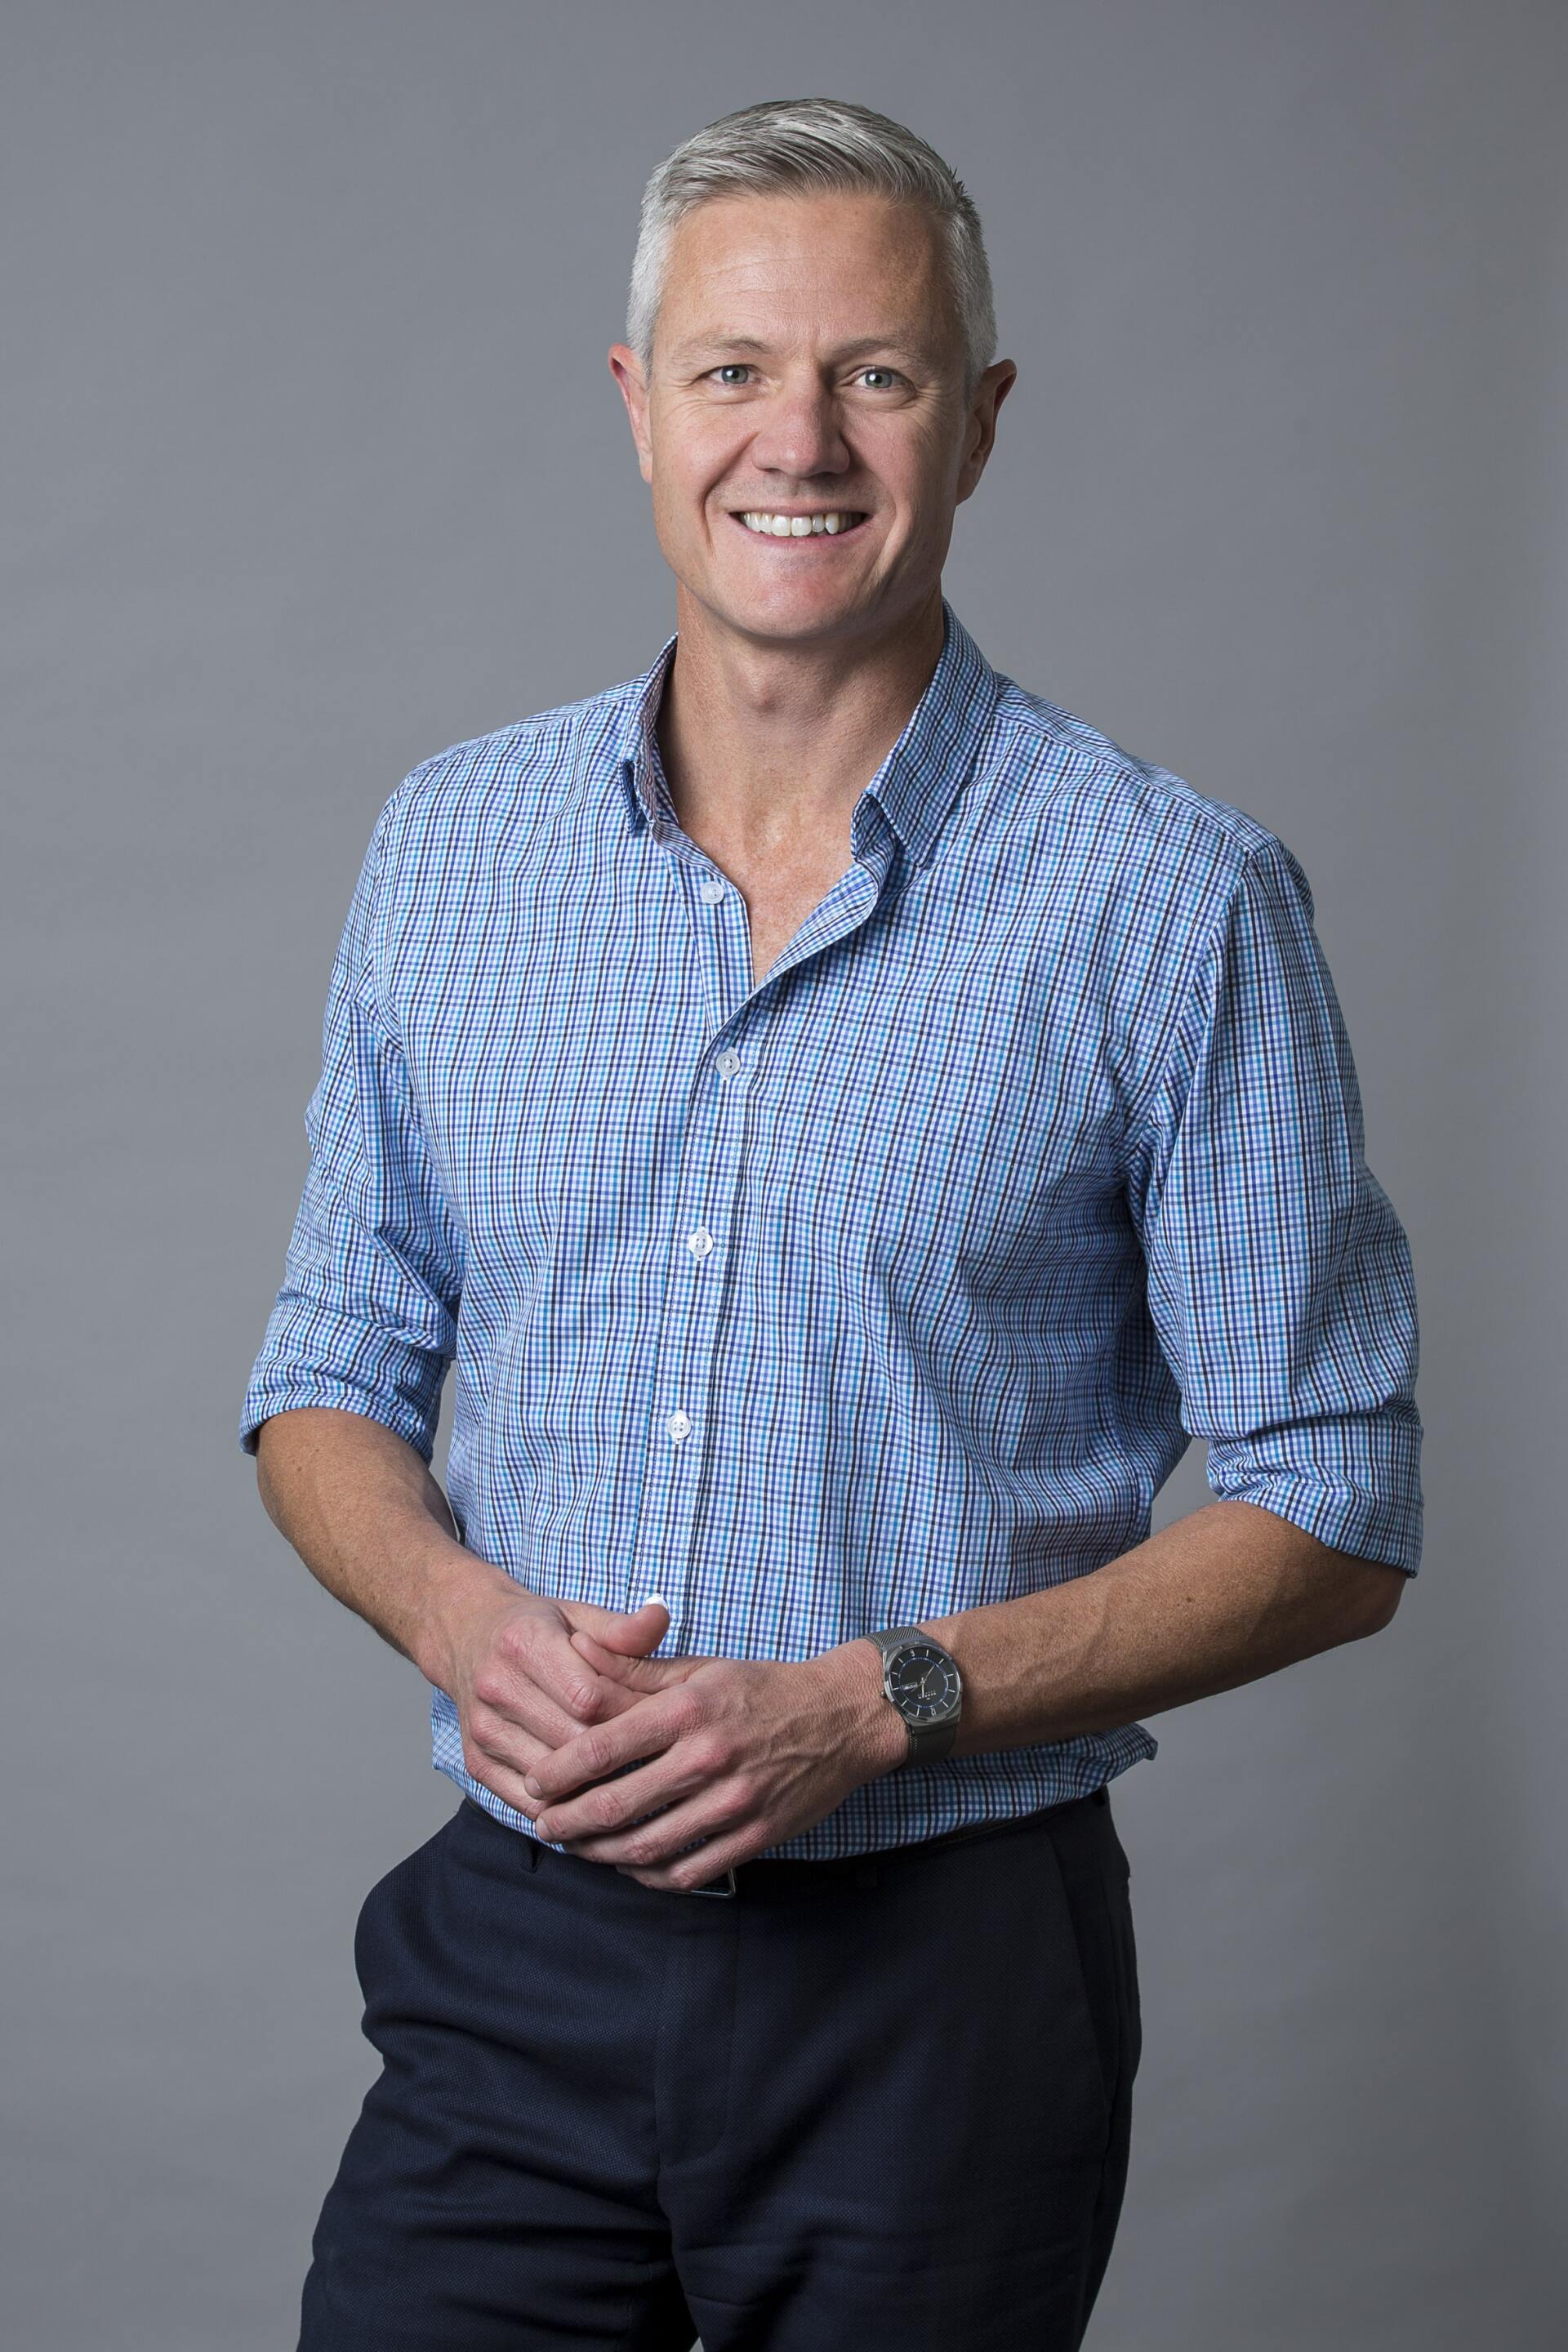 Dr Gavin Stringfellow of Visionary Eye Specialists.  Searching for an Ophthalmologist in Sydney? Gavin is highly regarded and professional.